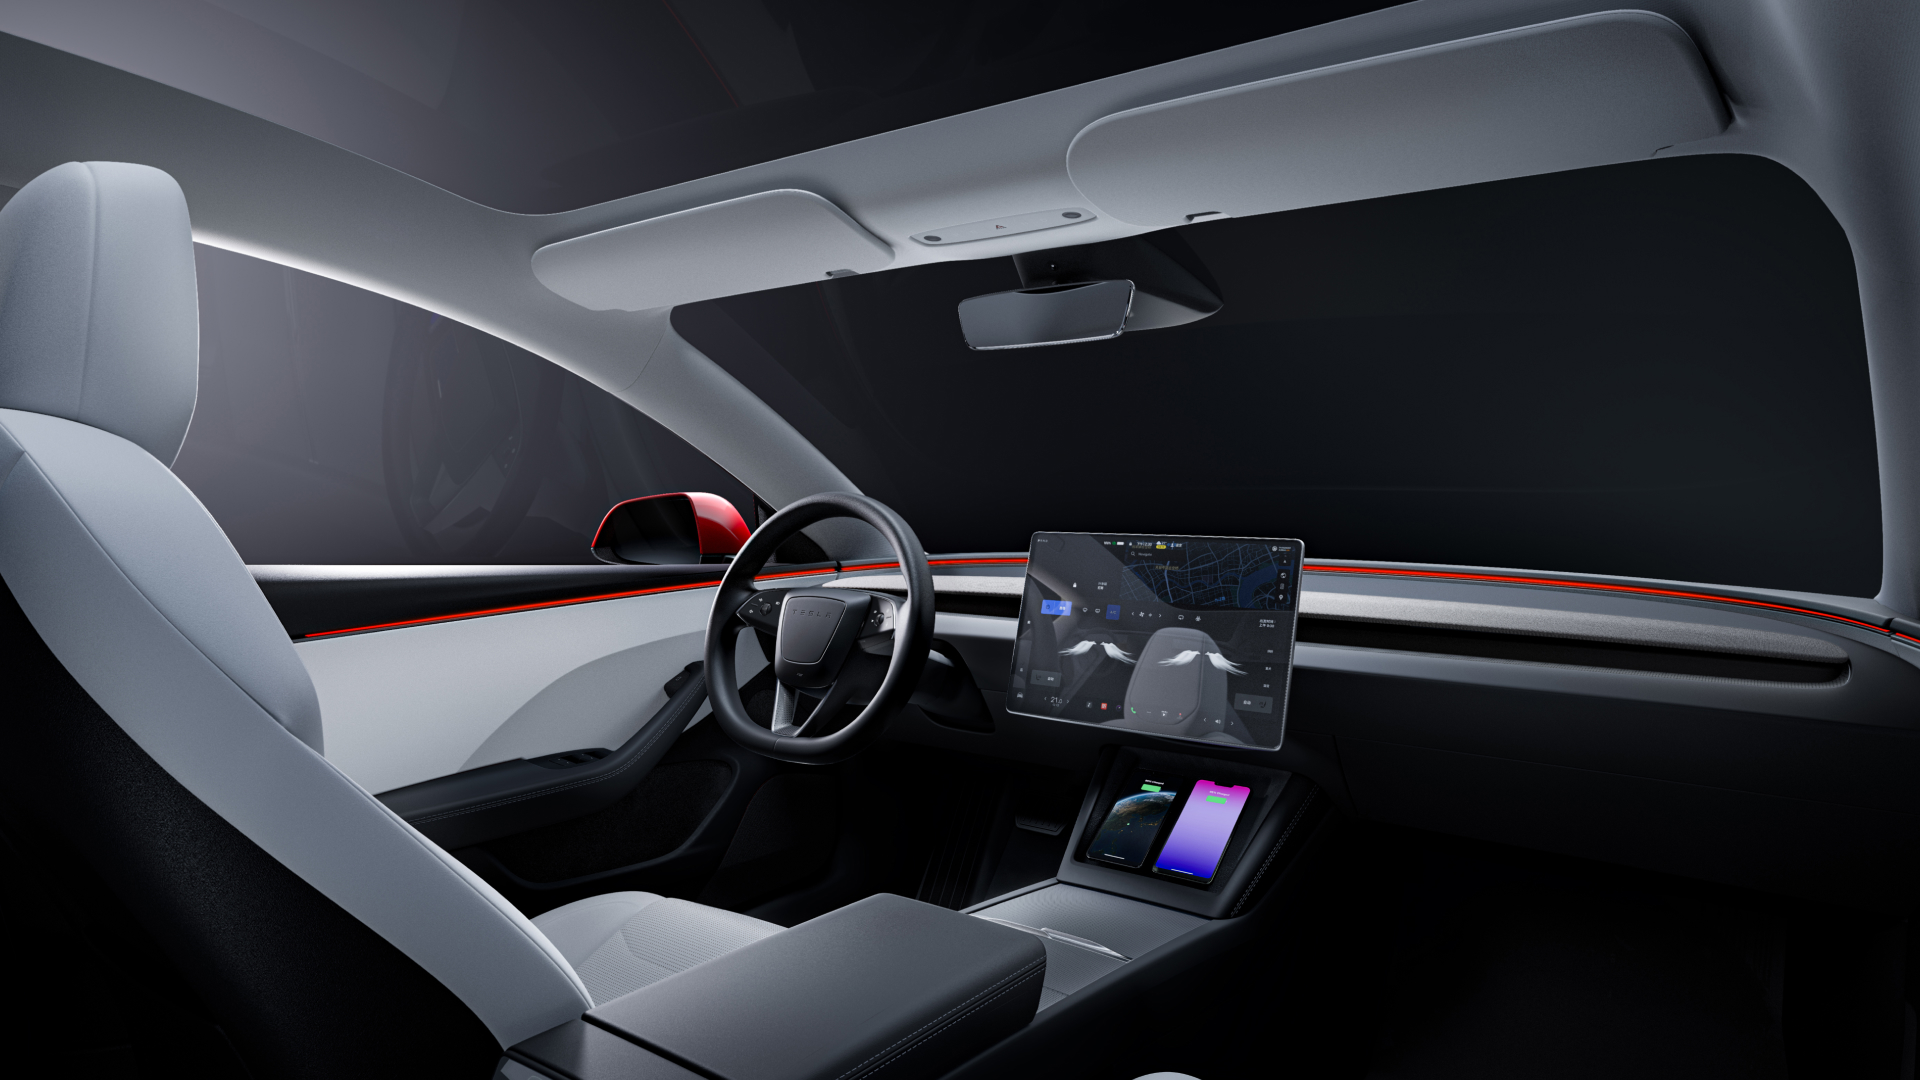 Tesla's Model 3+ Comes with Revamped Dimensions and More